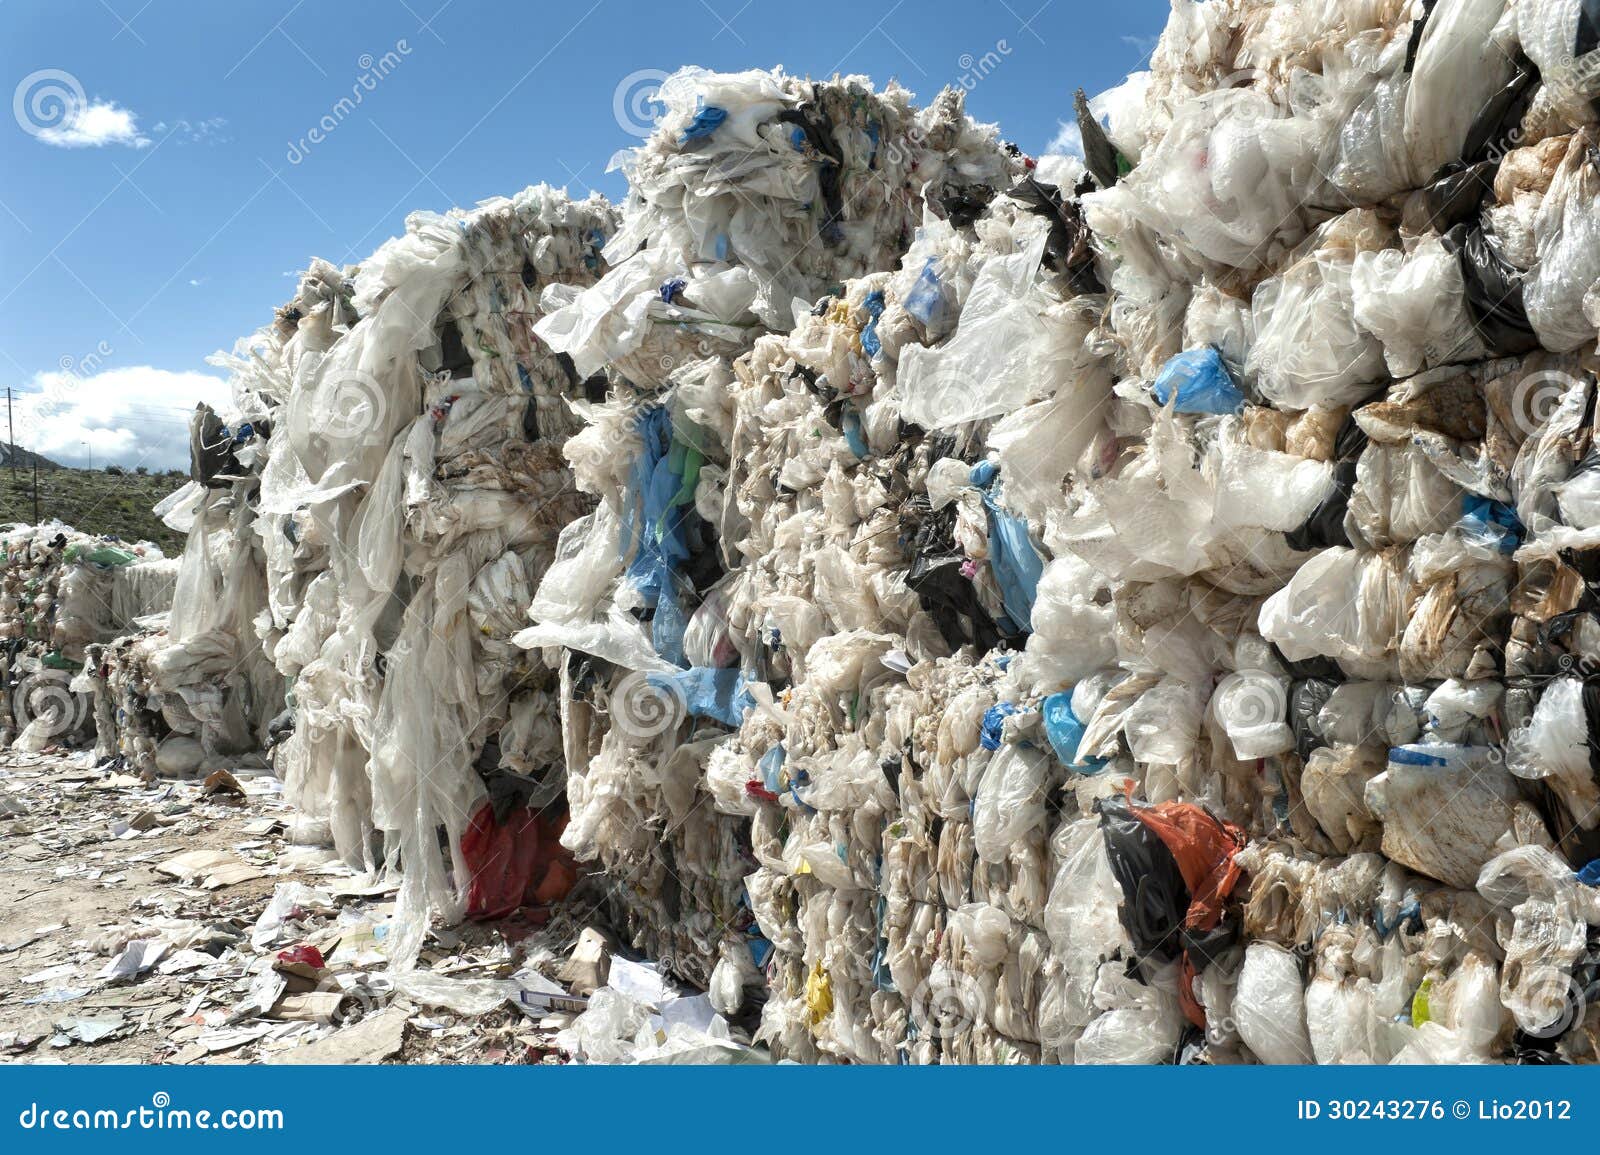 Paper and Plastic Recycling Stock Photo Image of cartons, clouds